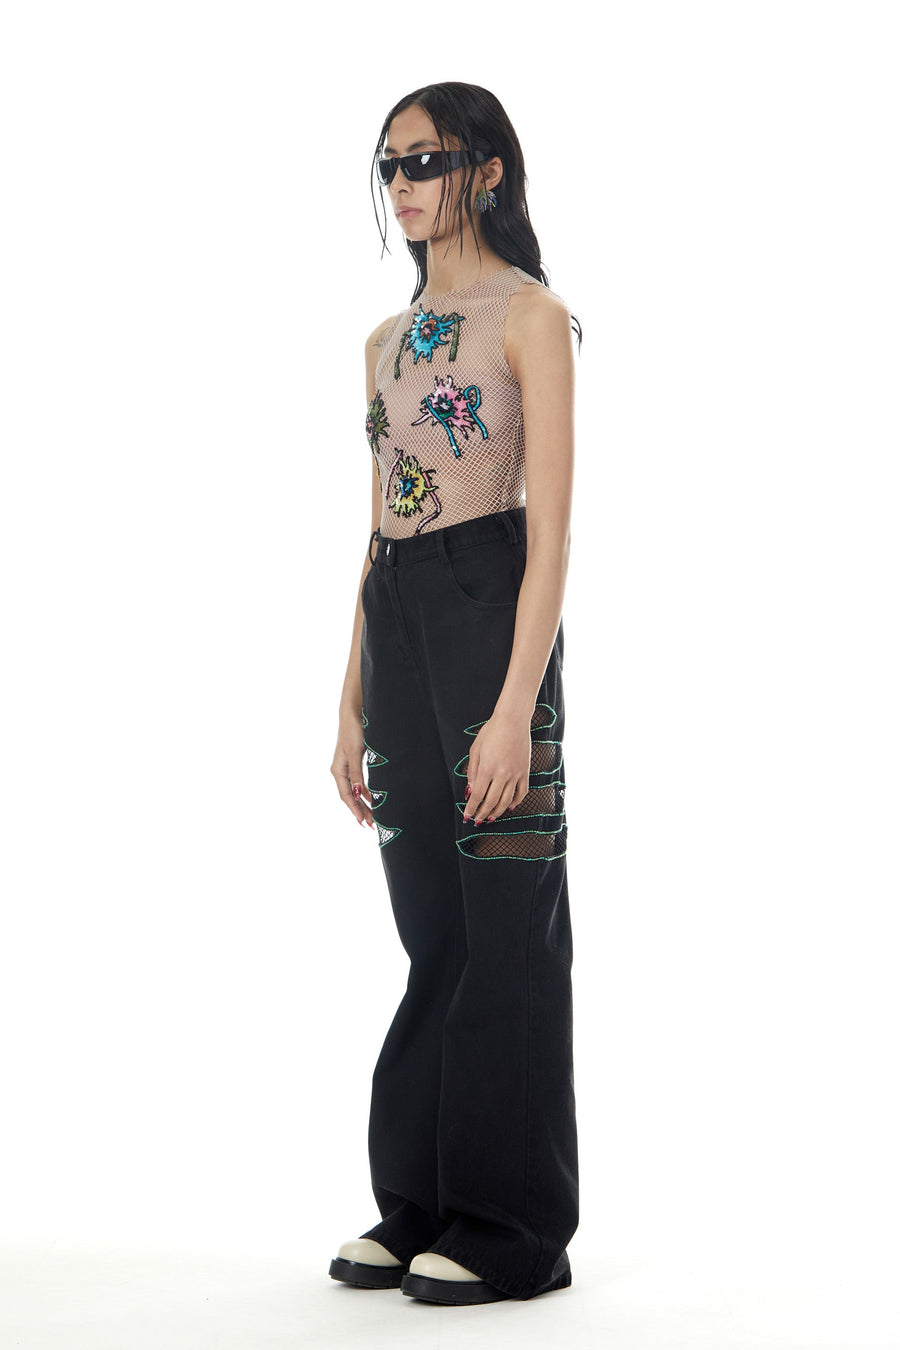 'Fiery Bloom' Embroidered Top - Kanika Goyal Label